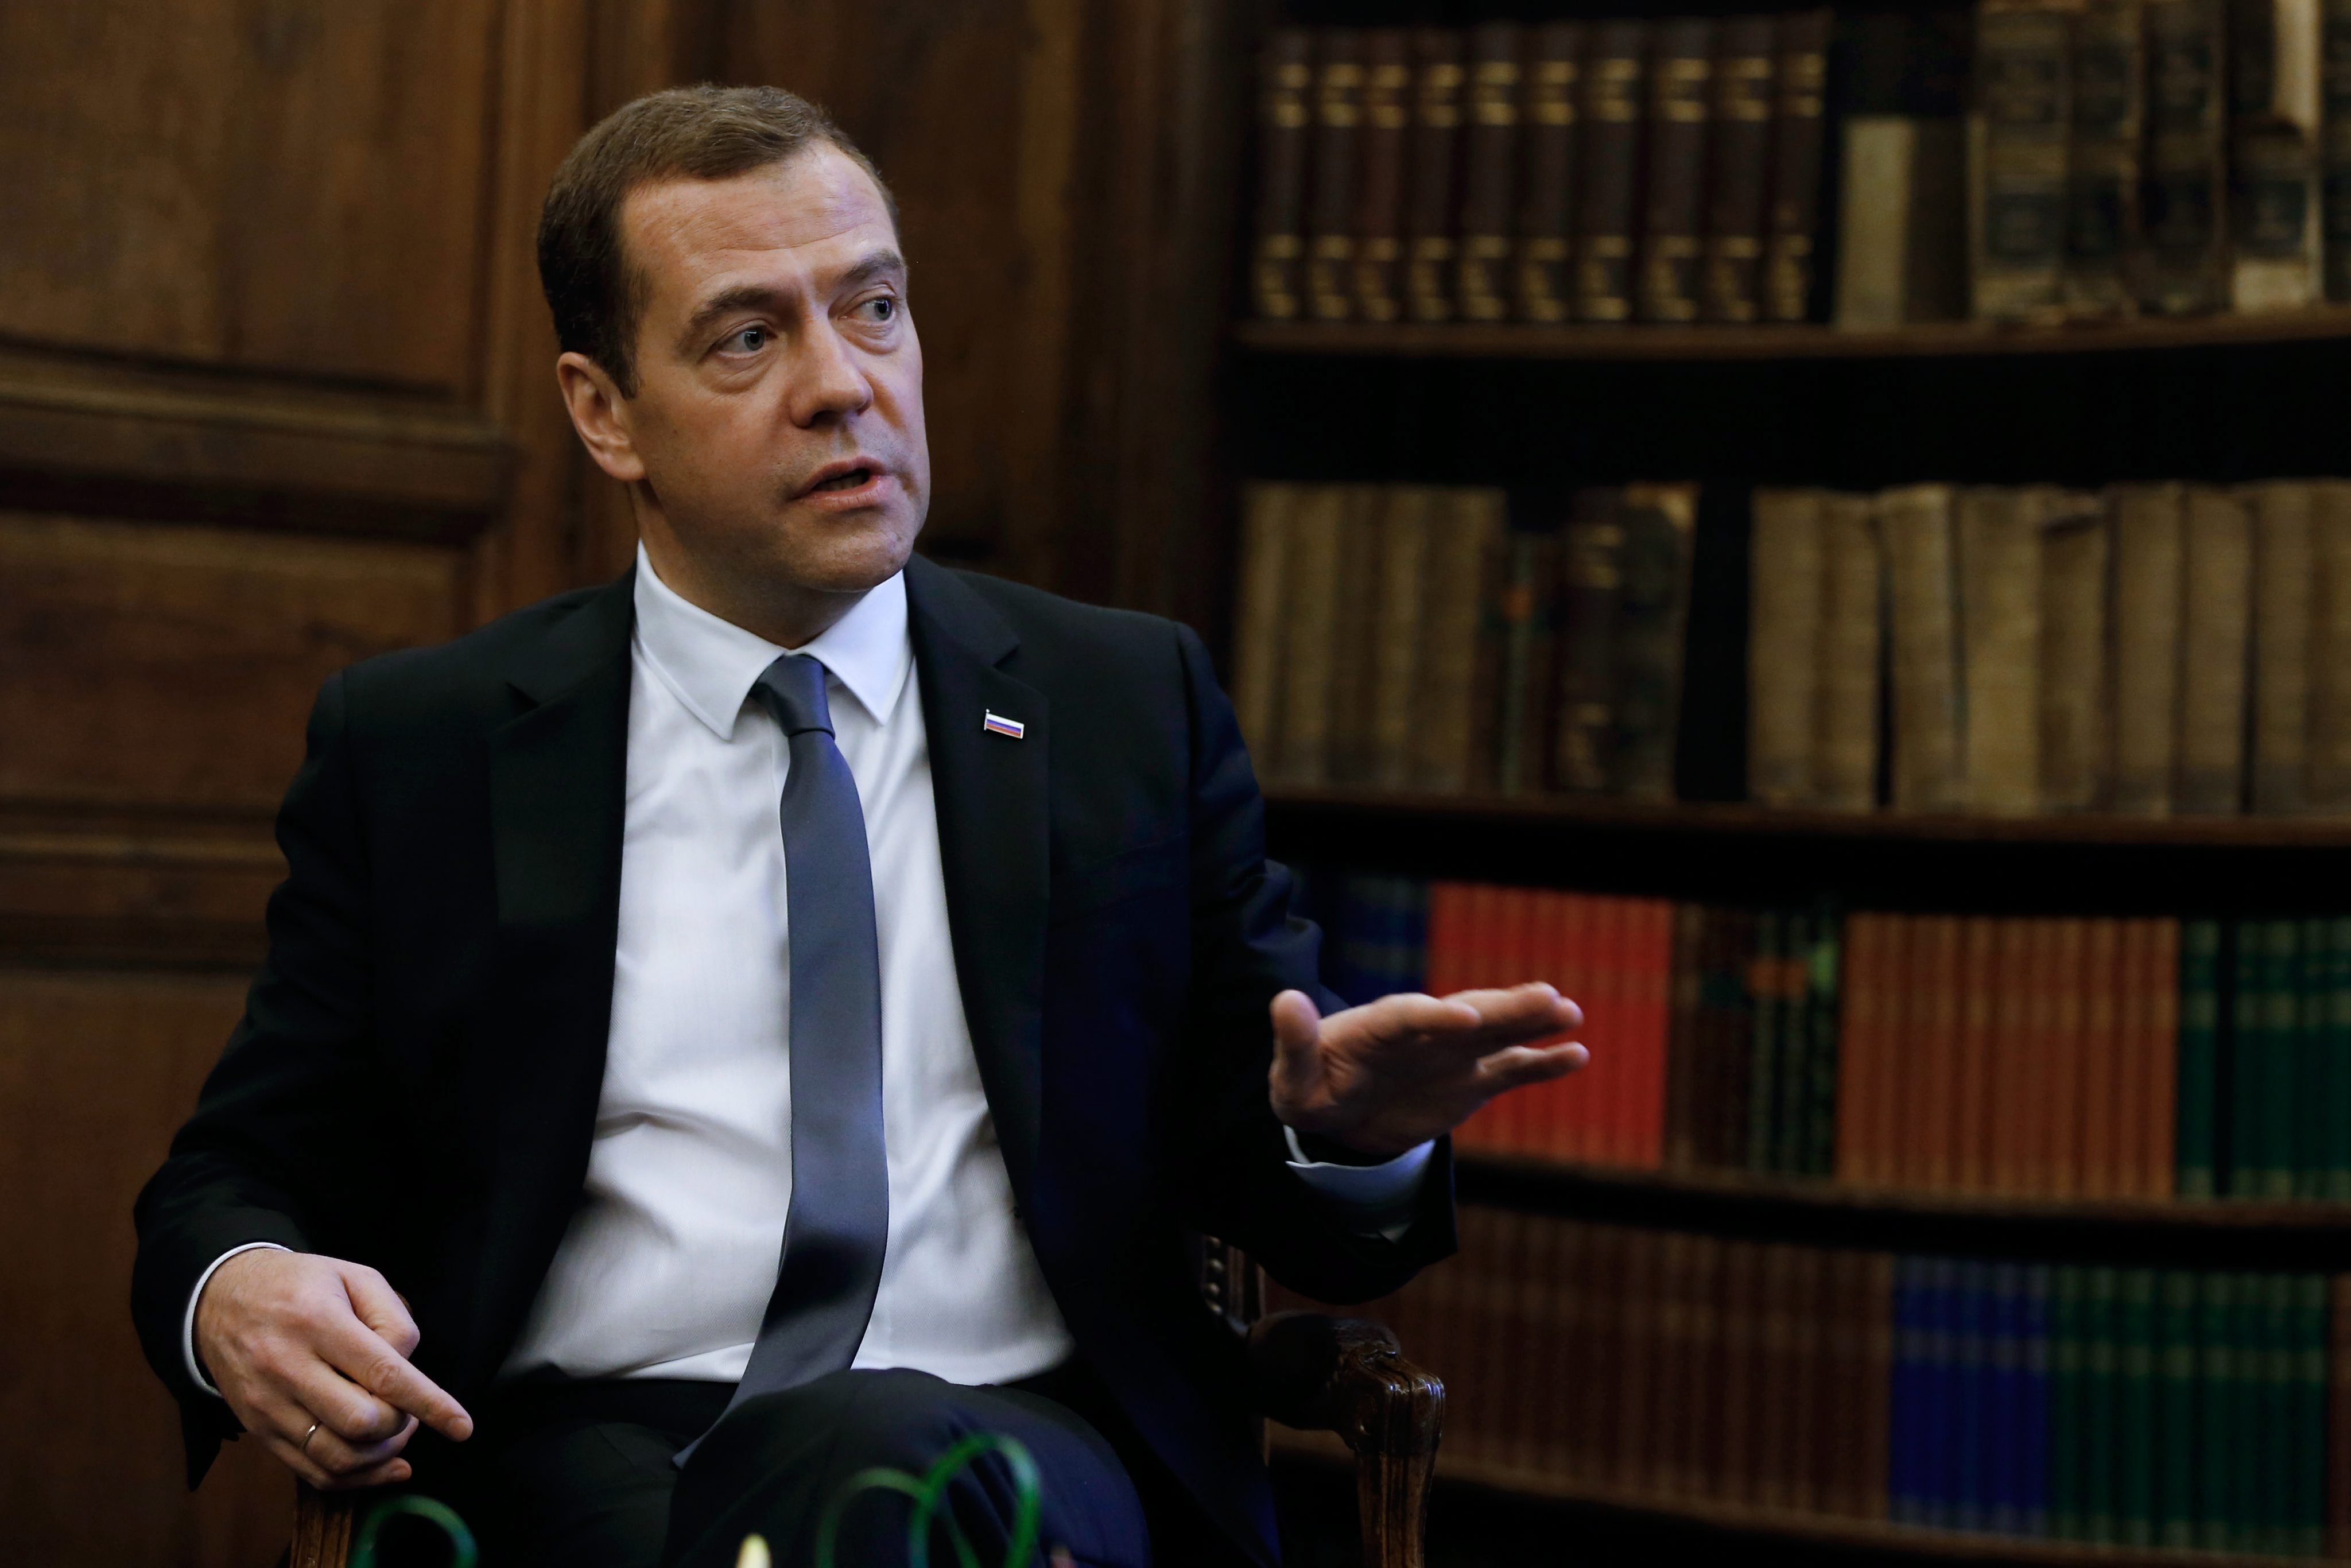 Russian Prime Minister Dmitry Medvedev during an interview with TIME magazine on the sidelines of the 52nd Munich Security Conference in Munich, Feb. 13, 2016. (Dmitry Astakhov—Sputnik/EPA)